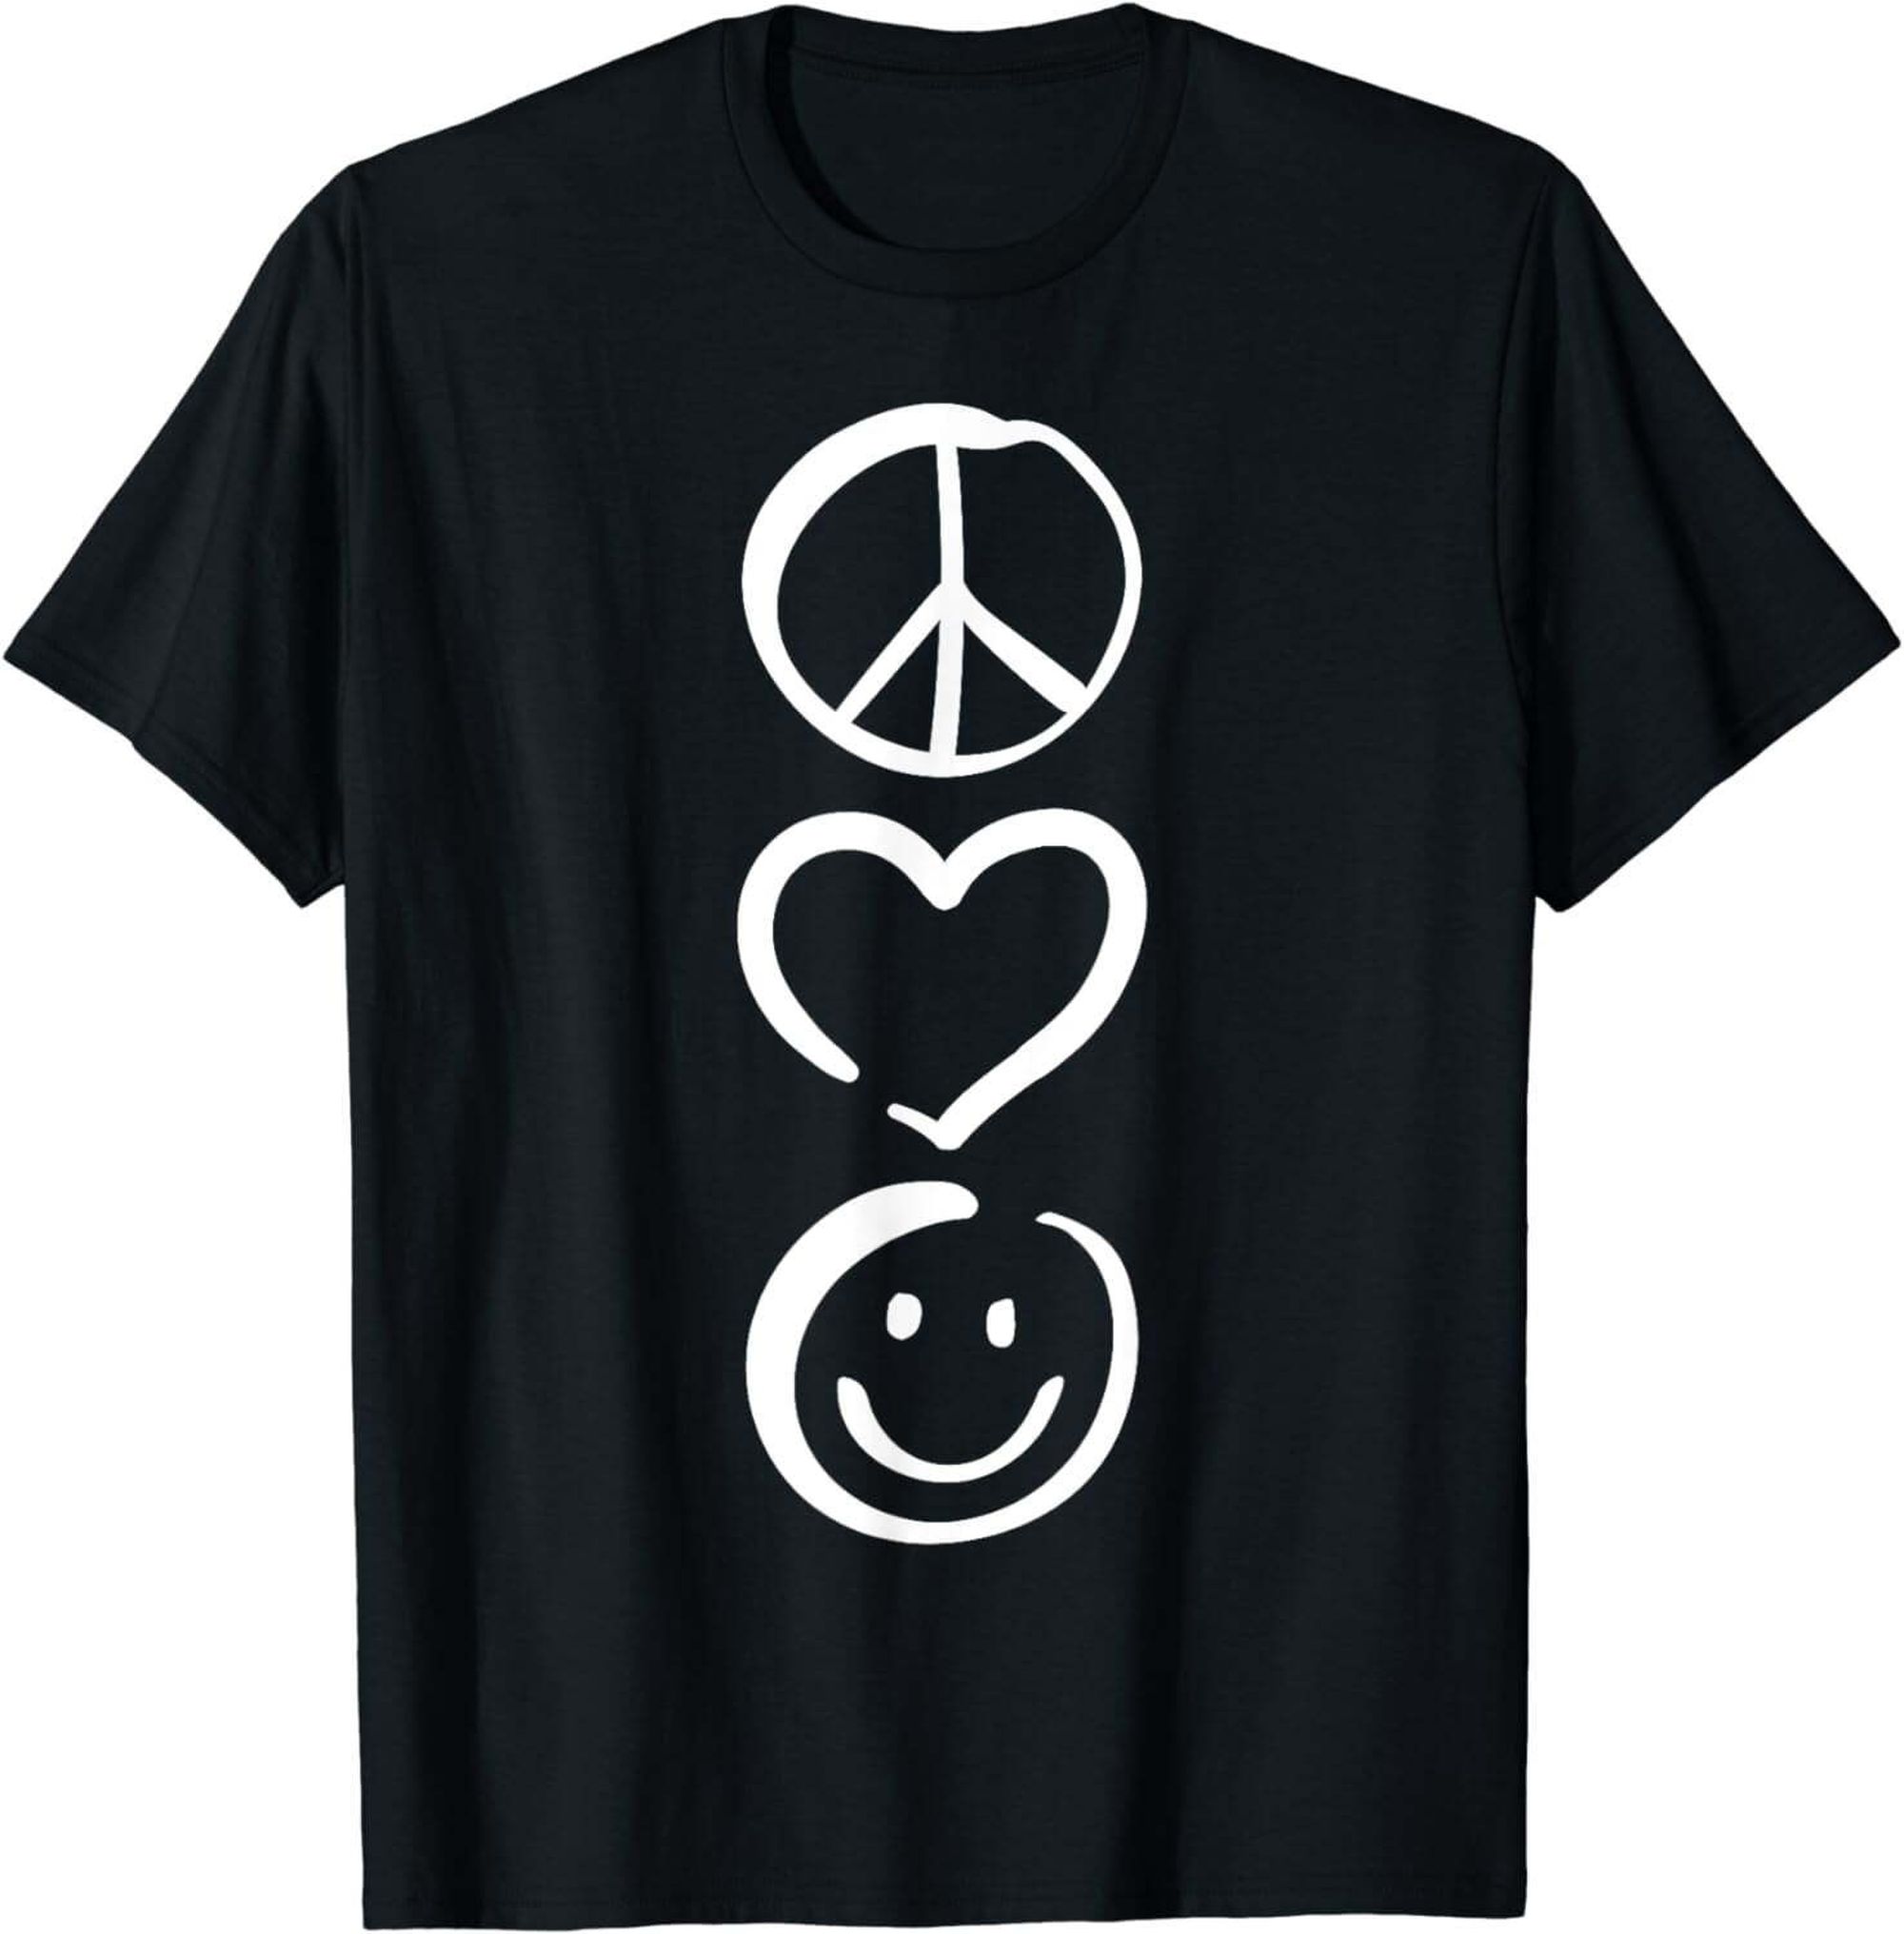 Spread Positivity with our Peace Love and Happiness T-Shirt featuring a ...